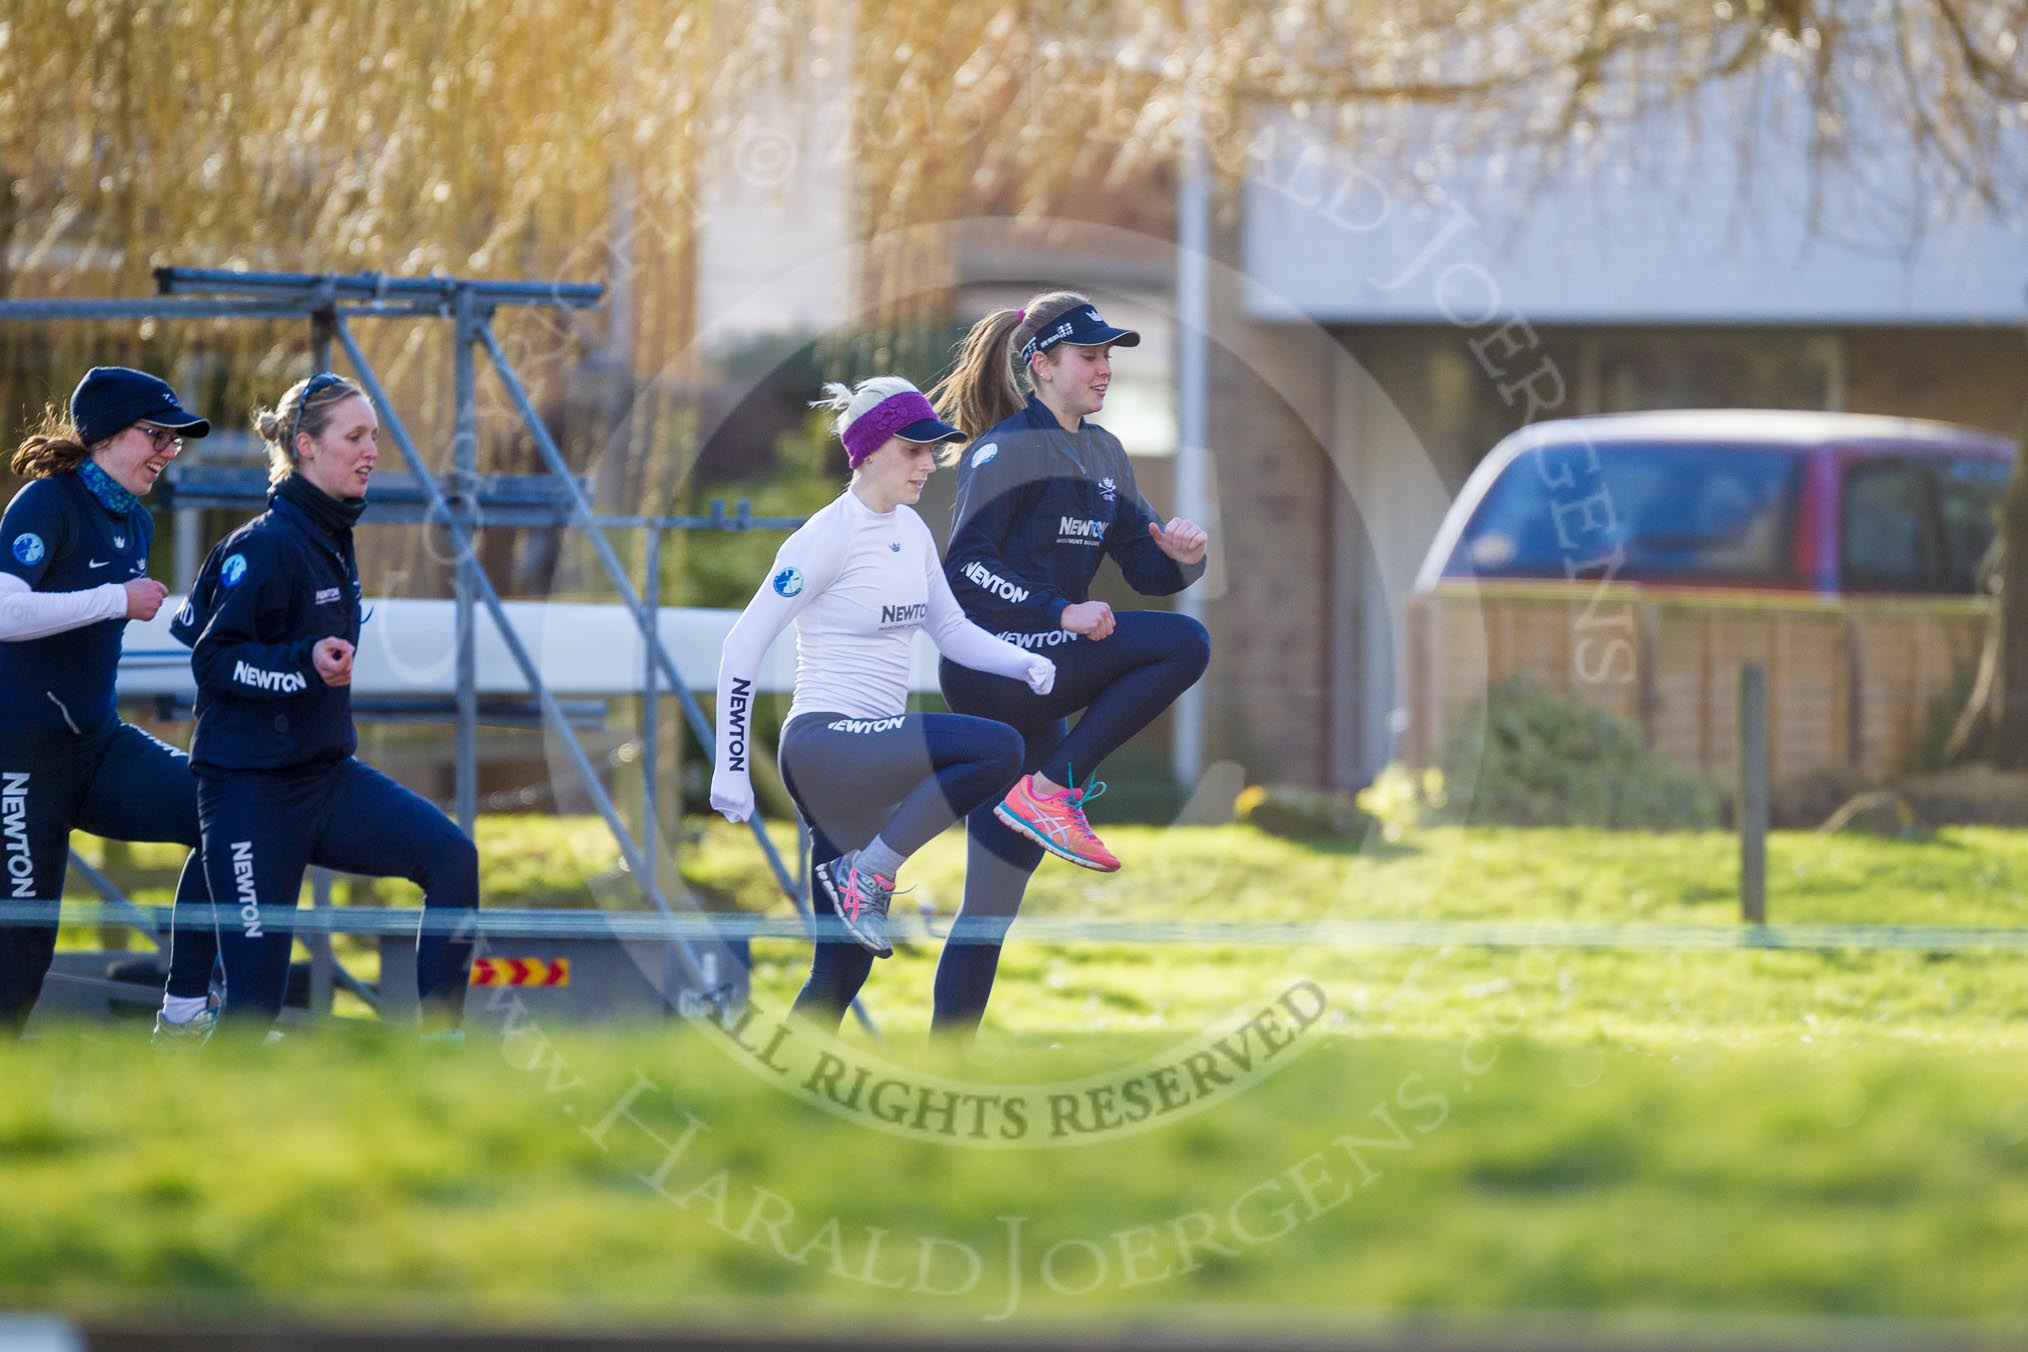 The Boat Race season 2015: OUWBC training Wallingford.

Wallingford,

United Kingdom,
on 04 March 2015 at 16:16, image #183